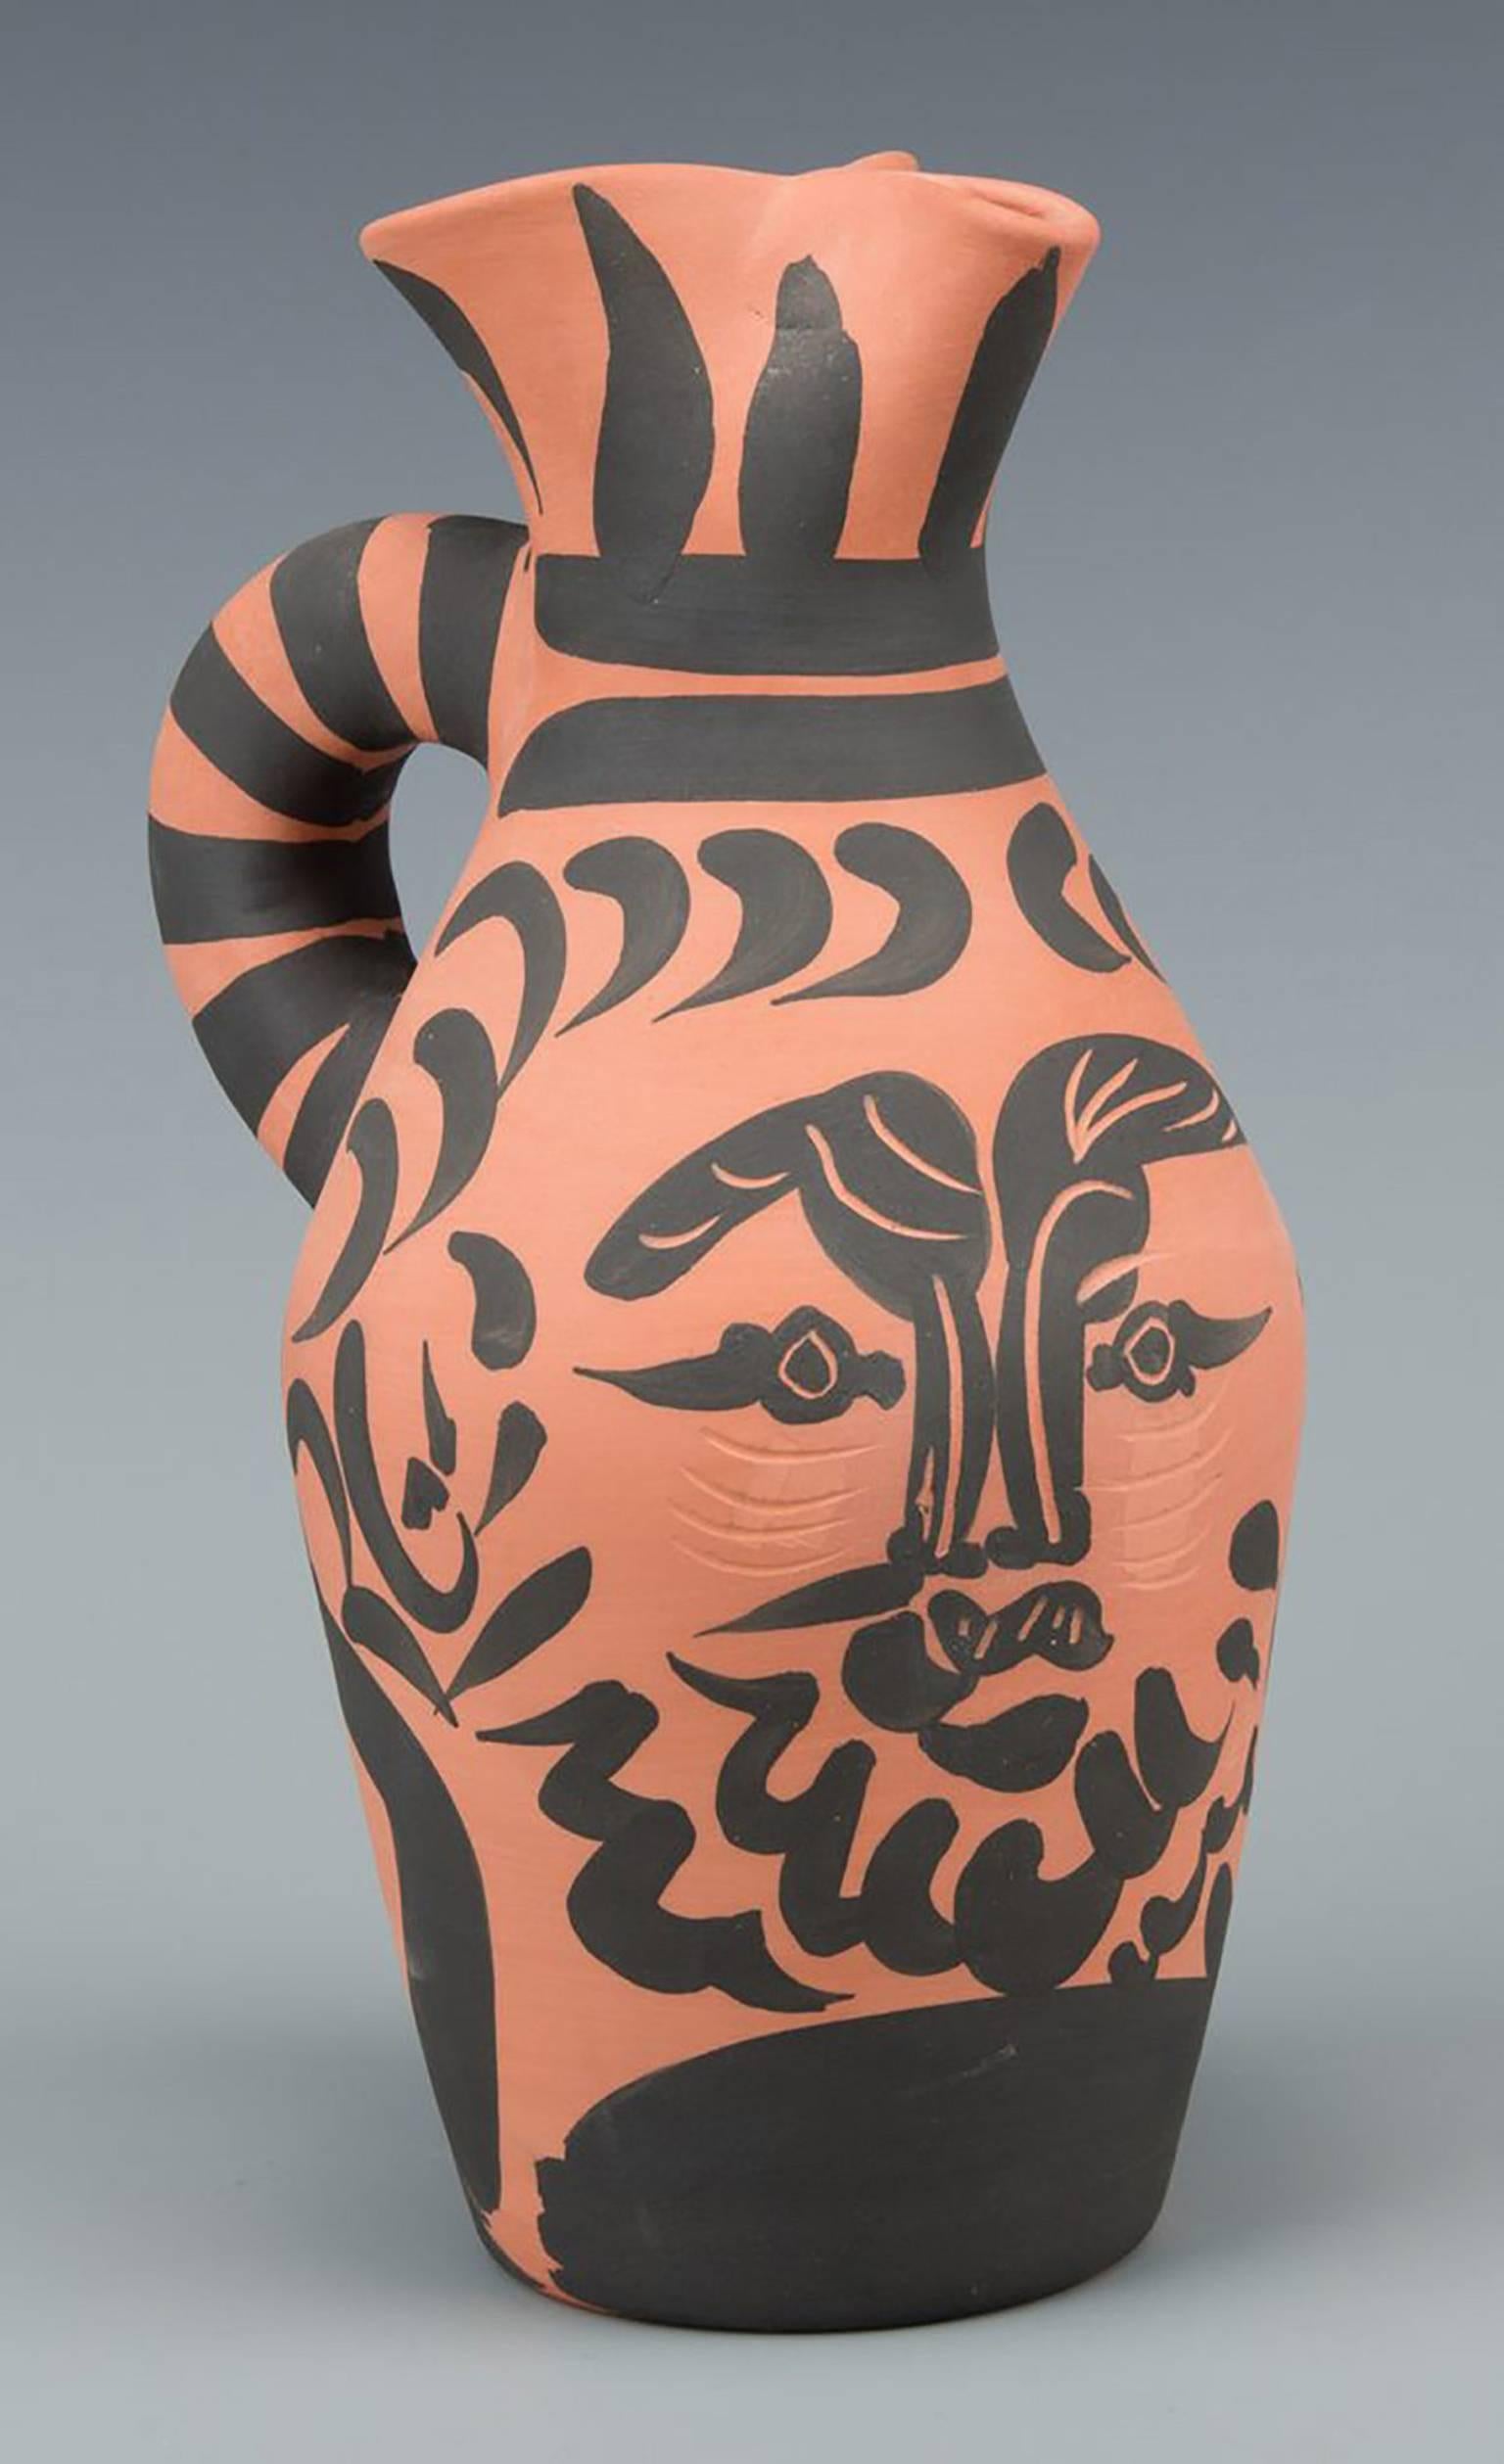 Pablo Picasso (Spanish, 1881-1973)  Yan Barbu  20th century  Ceramic pottery vessel  Black paint on red earthenware  Signed and numbered “Madoura Plein Feu Edition Picasso, 294/300 V. 104″  10.5″ x 6.25″ x 4”  Provenance: acquired from private